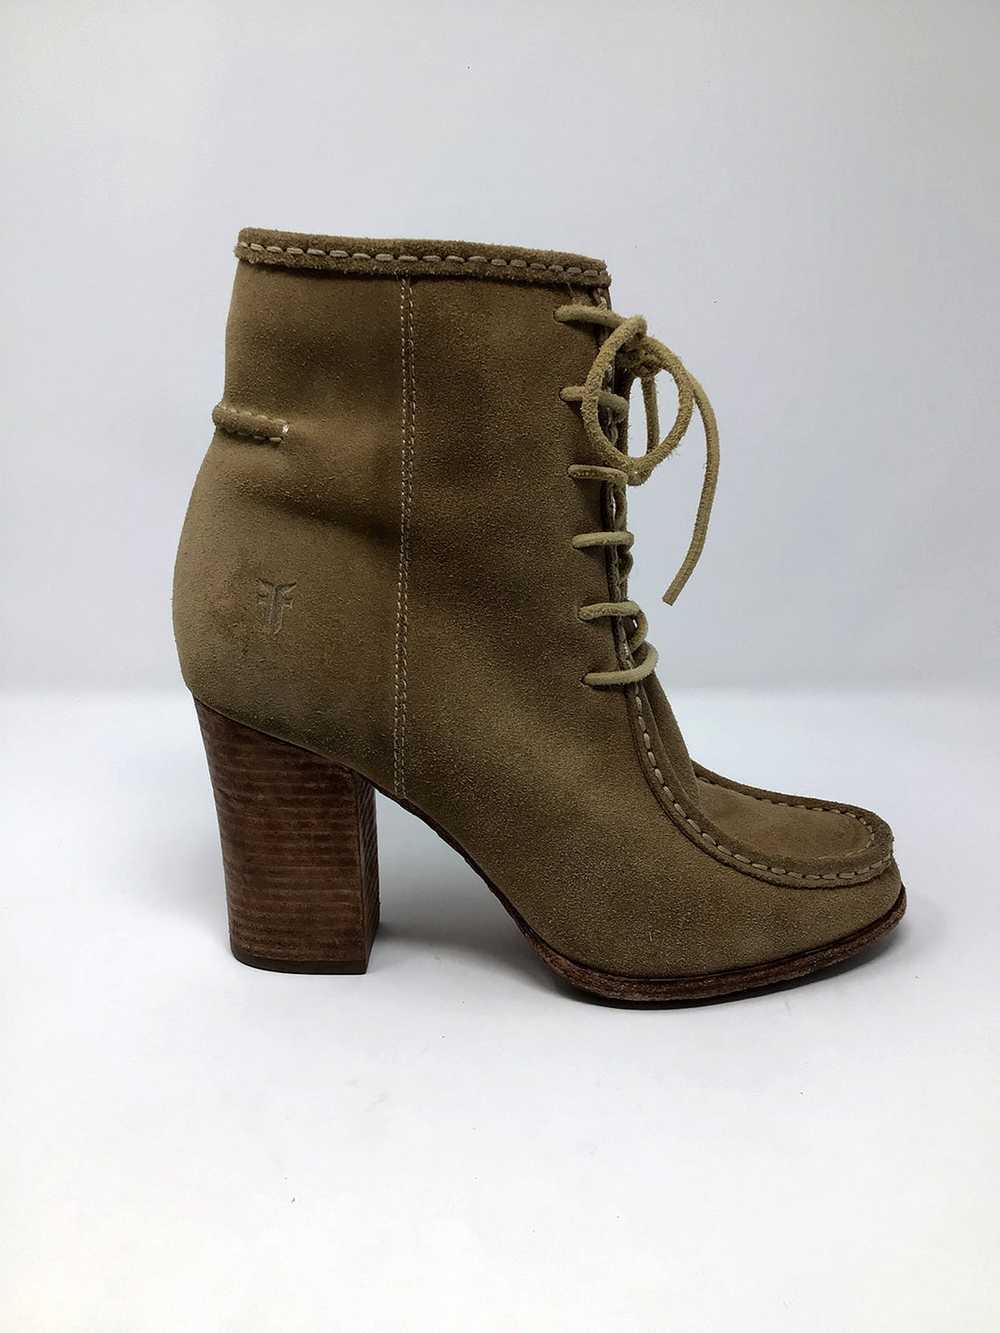 Frye Size 8.5 Light Brown Suede Ankle Boots - image 2